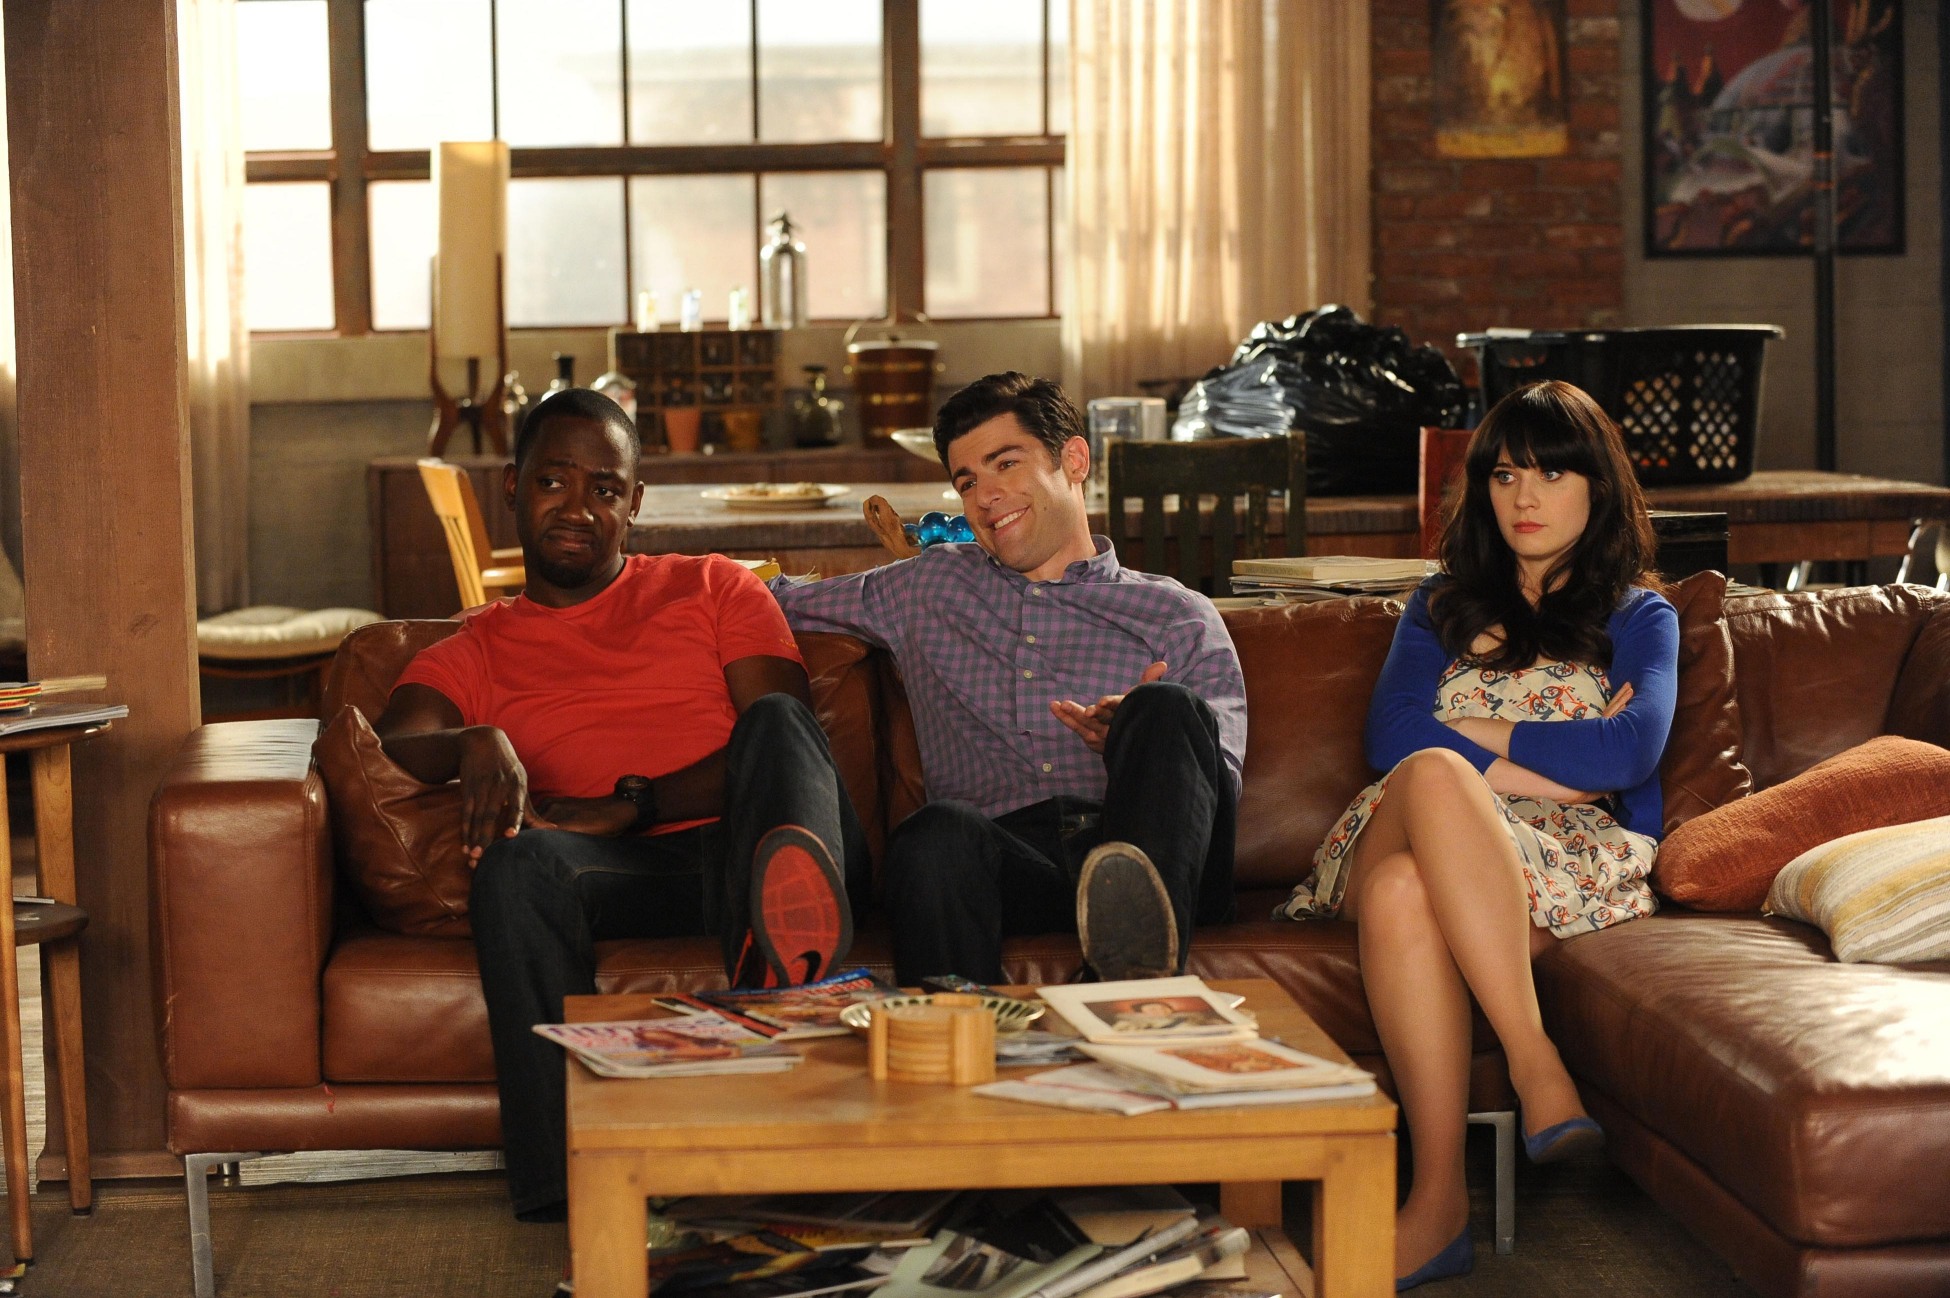 New Girl Wallpaper 213 1920x1080 px ~ PickyWallpapers.com